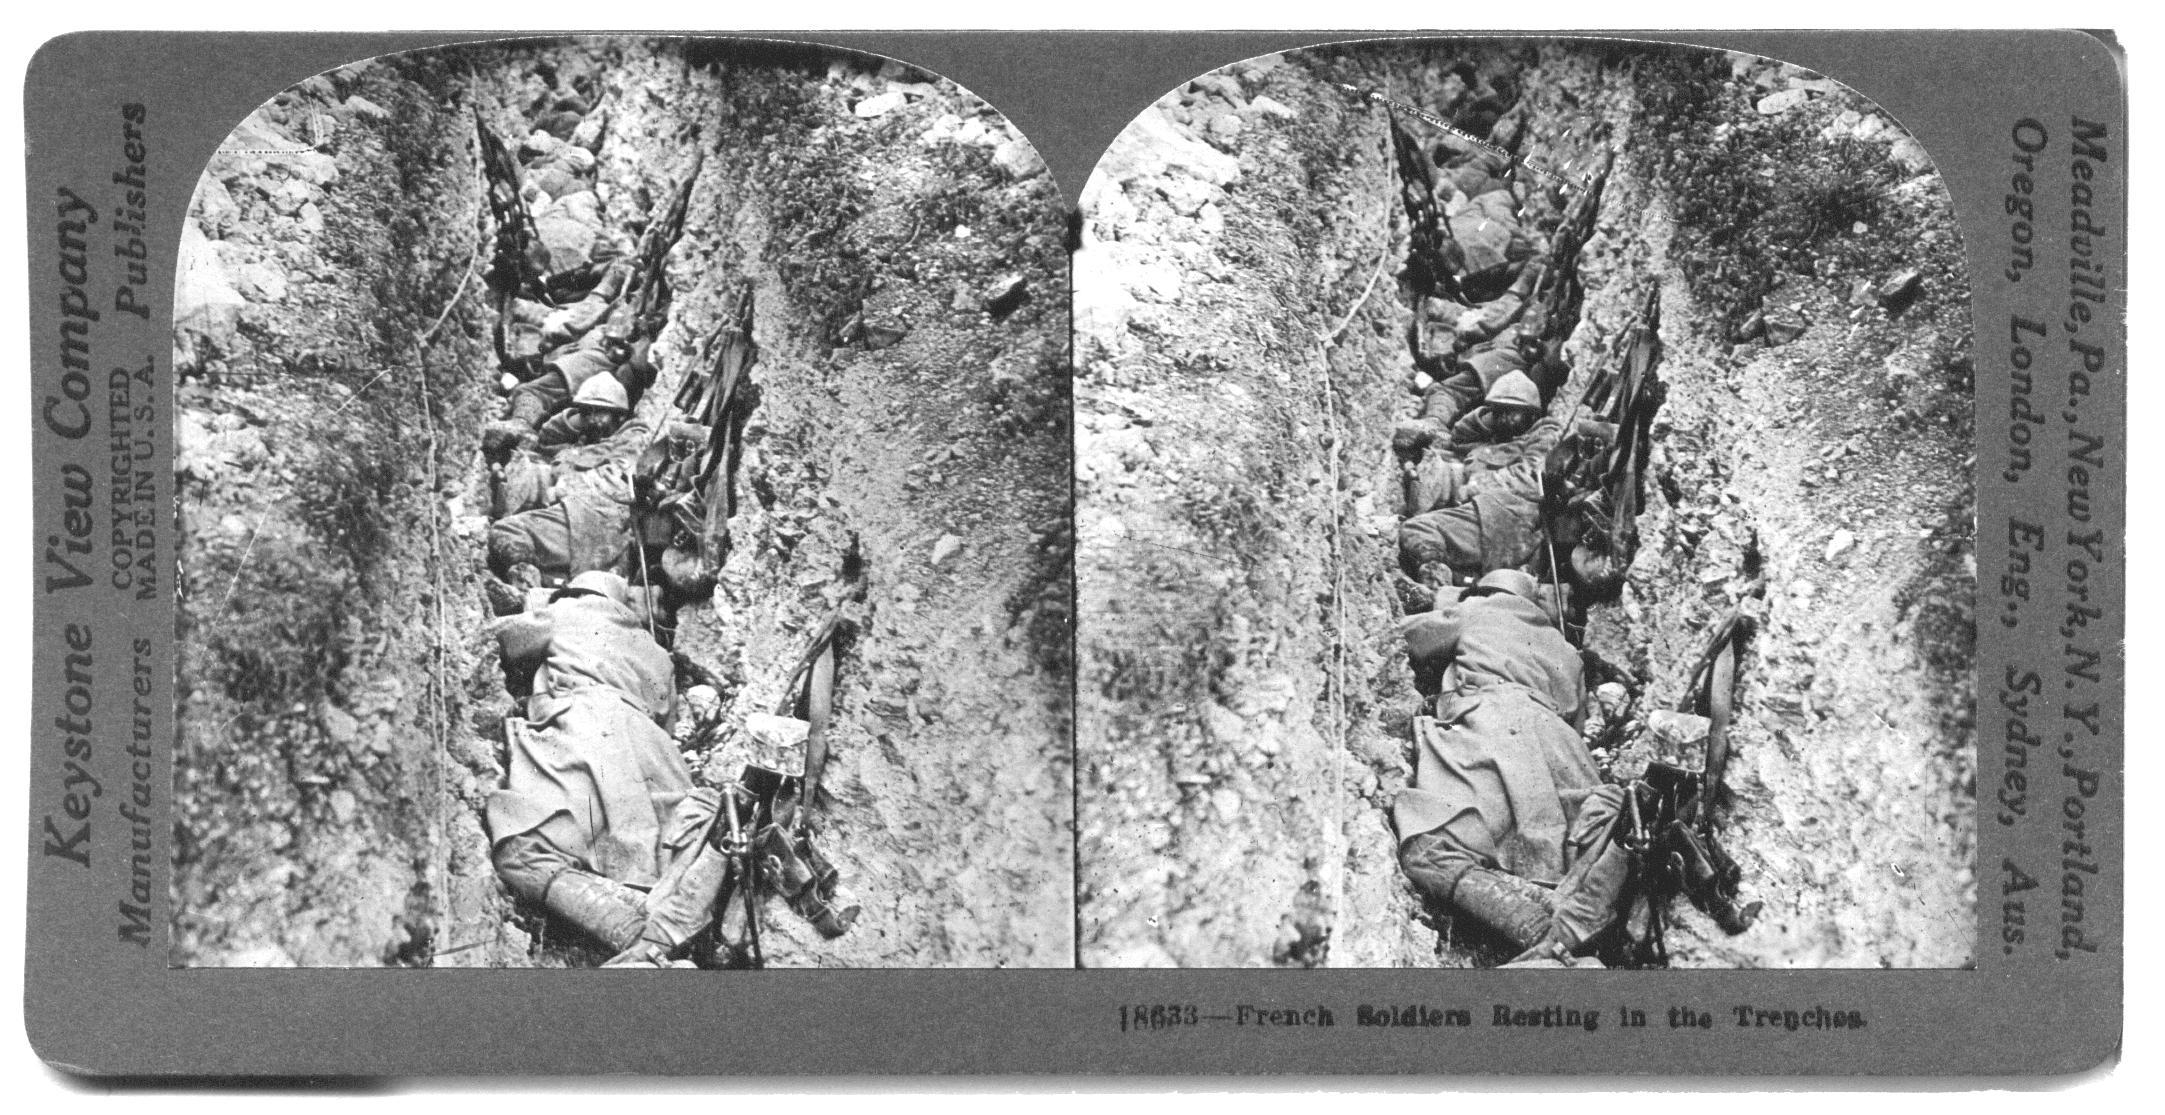 French Soldiers Resting In The Trenches